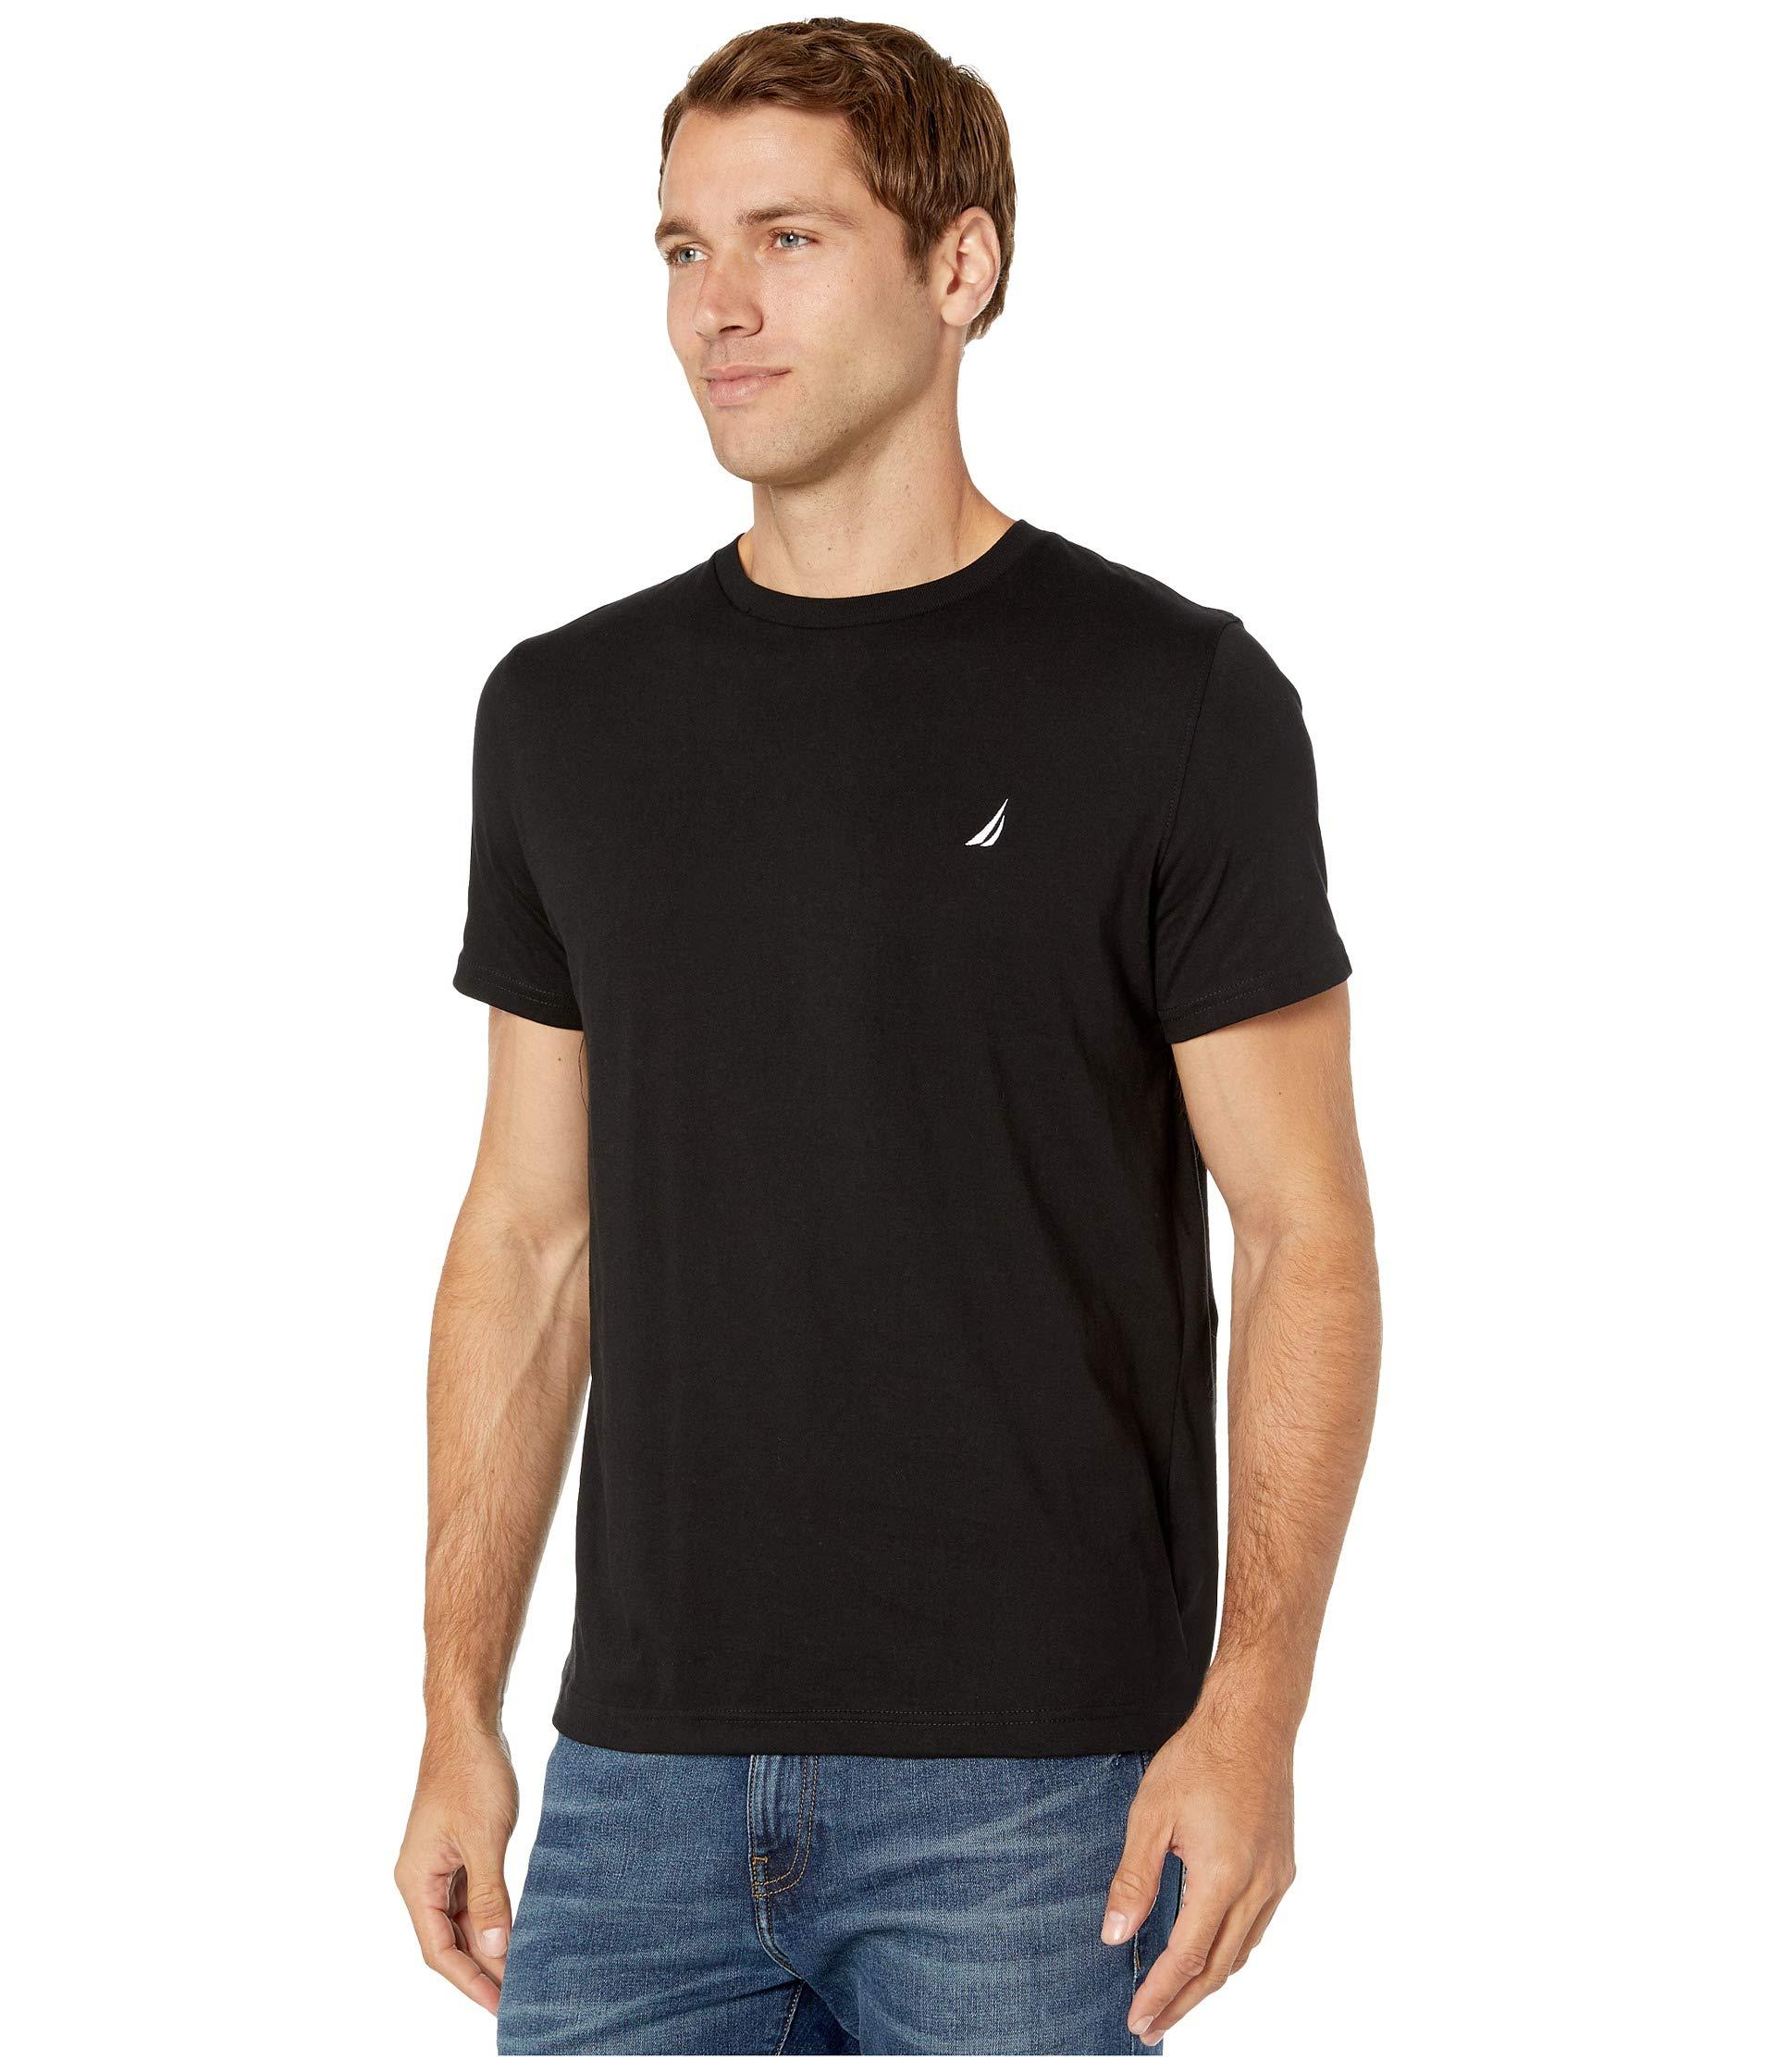 Nautica Cotton Short Sleeve Solid Crew Neck T-shirt in Black for Men - Lyst